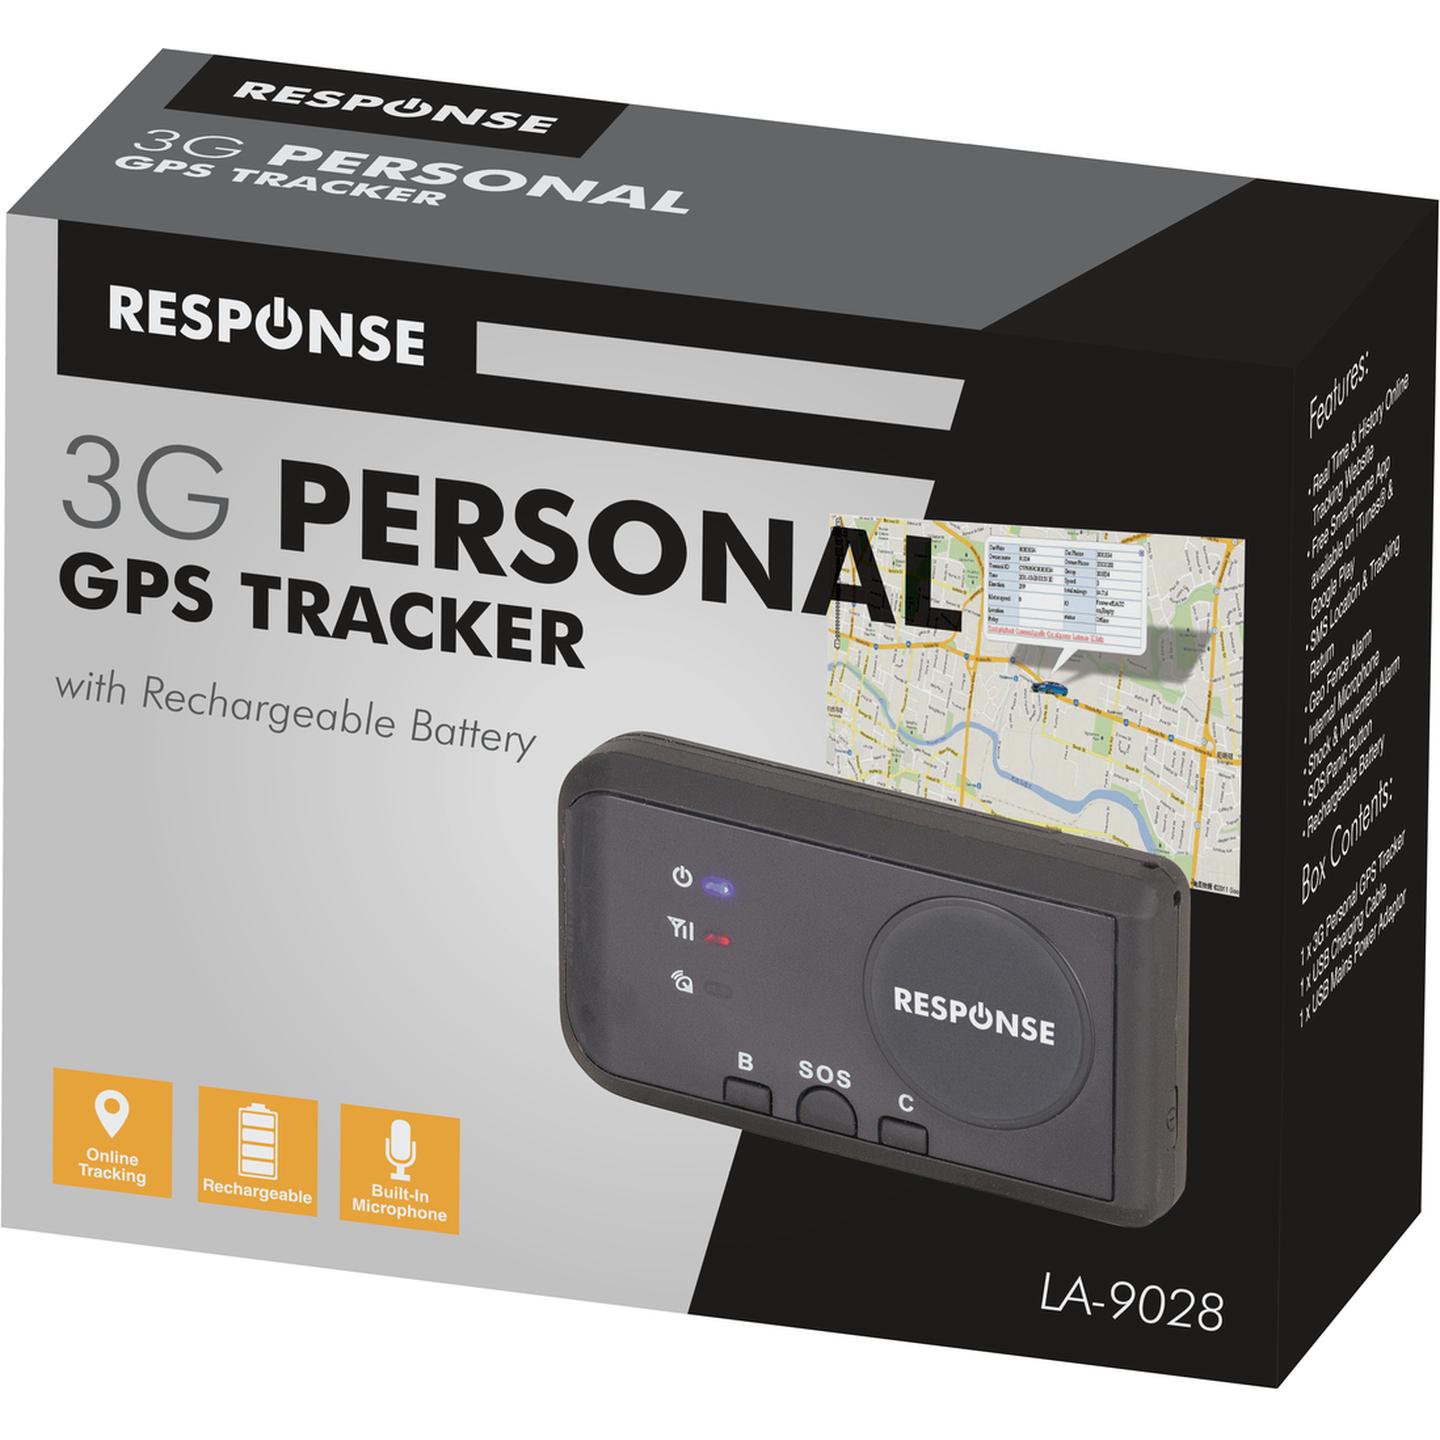 3G GPS Personal Tracker